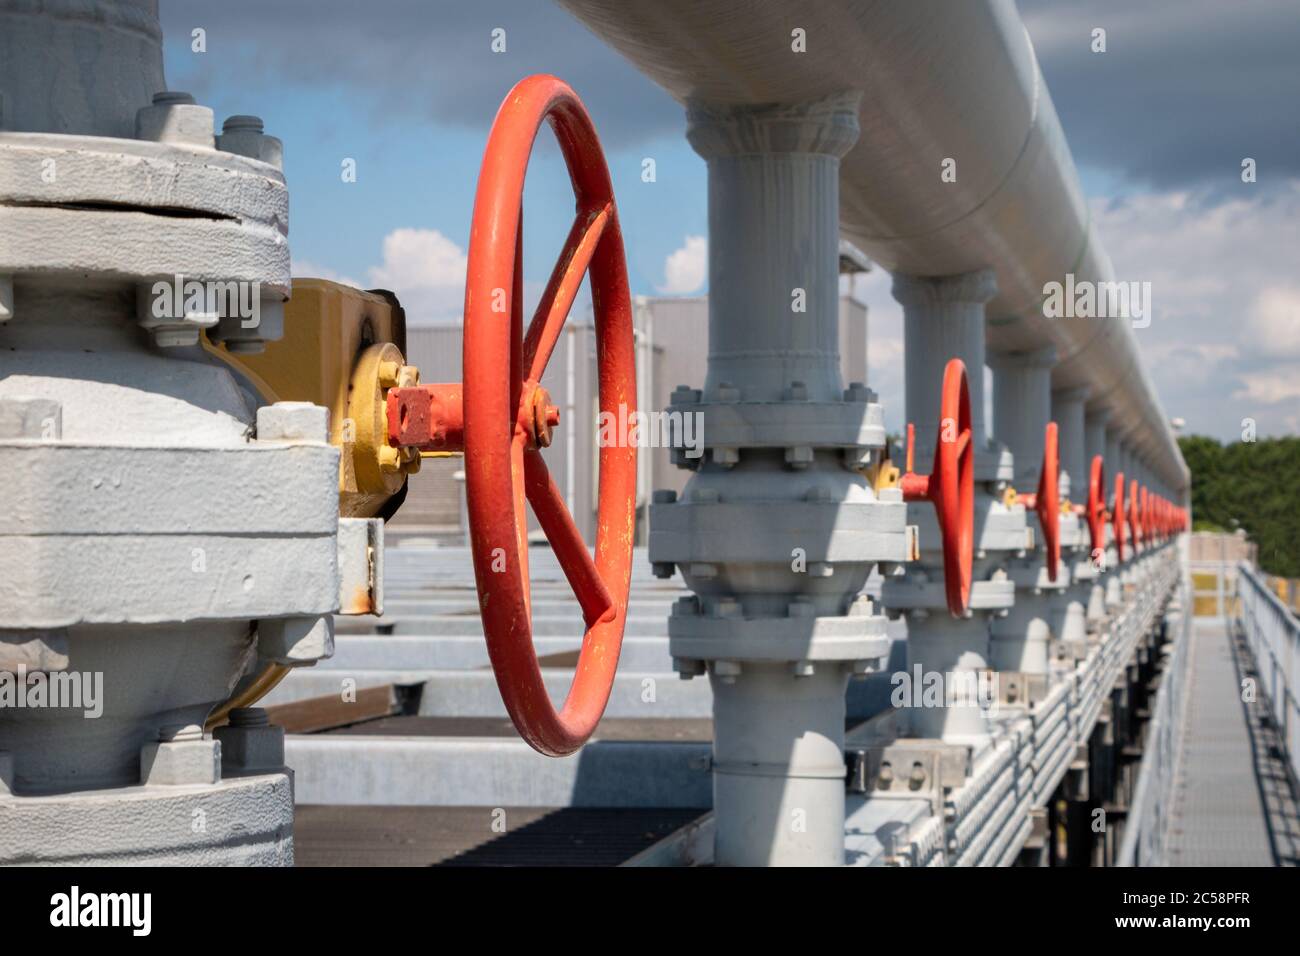 Red manual valves for opening or closing a pipe, also called hand valve in an industrial area Stock Photo